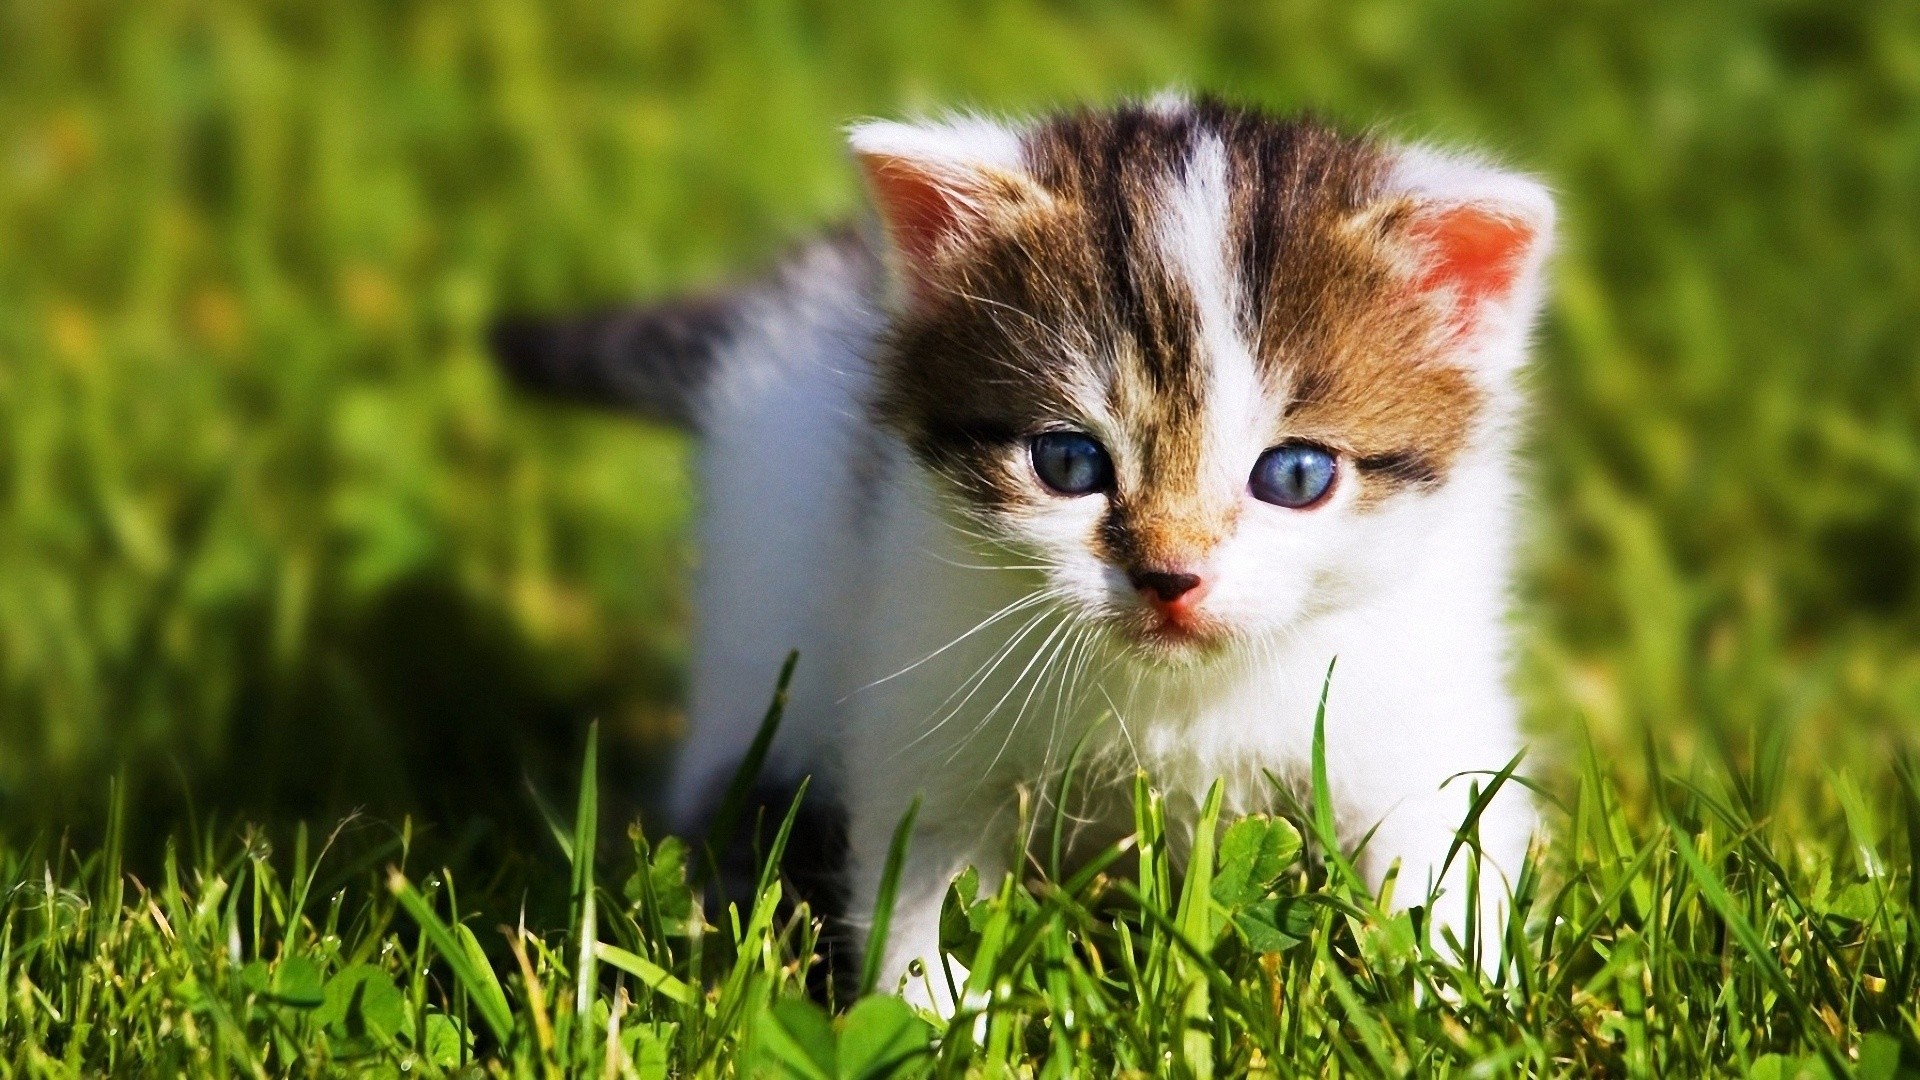 Cute Animals Images Free Download : Free Download 11 Hd Wallpapers Of ...